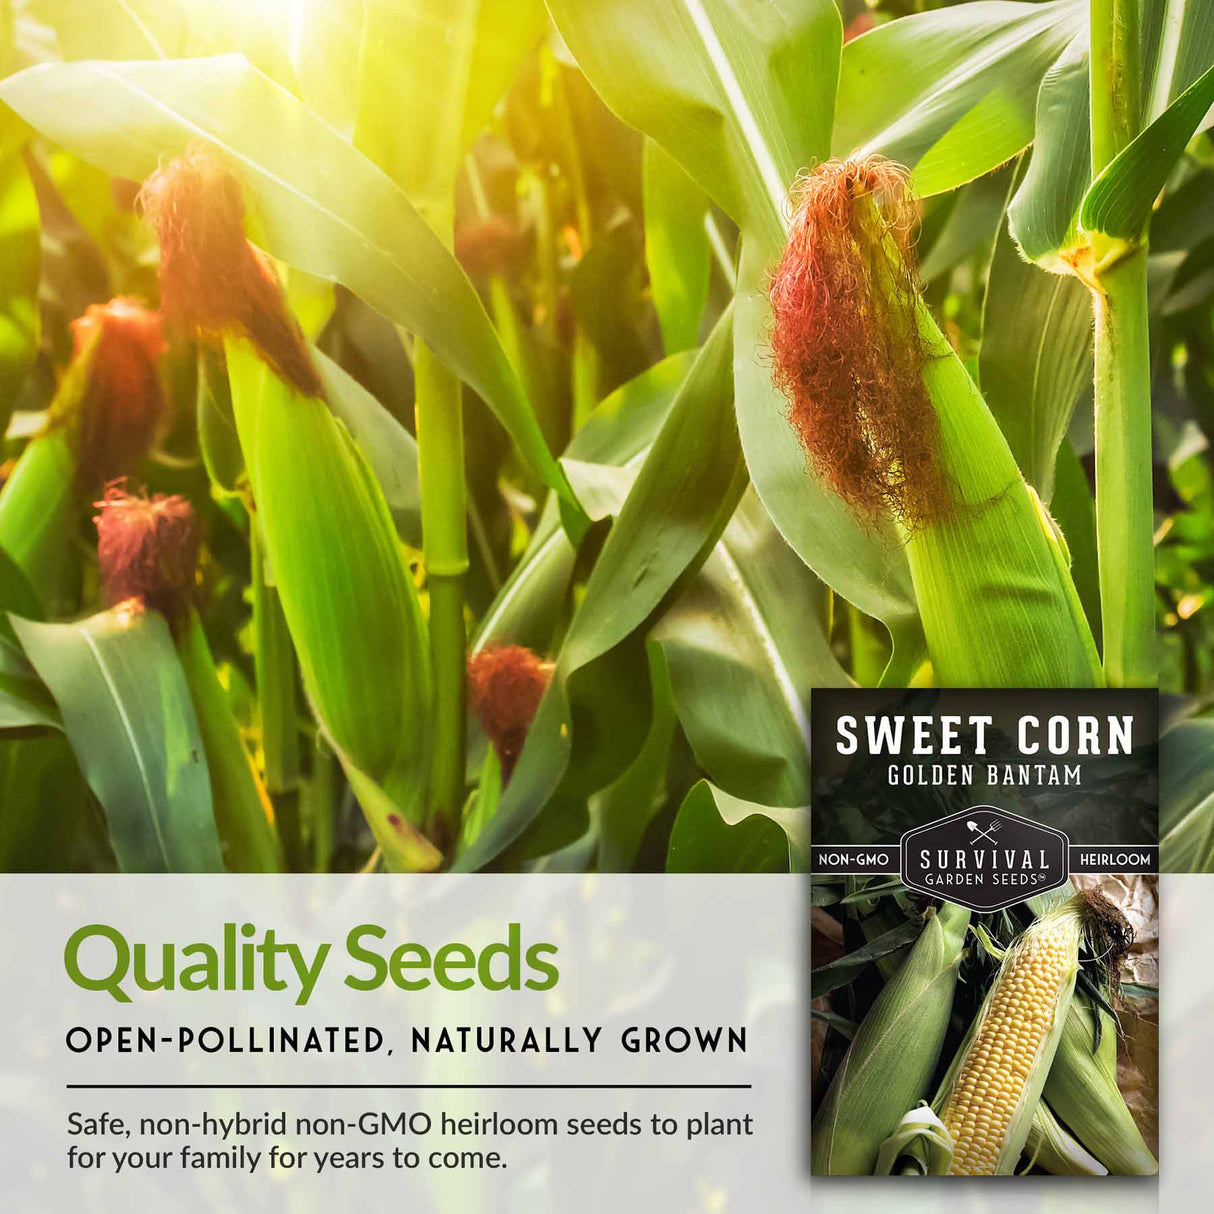 Quality Open-pollinated naturally grown sweet corn